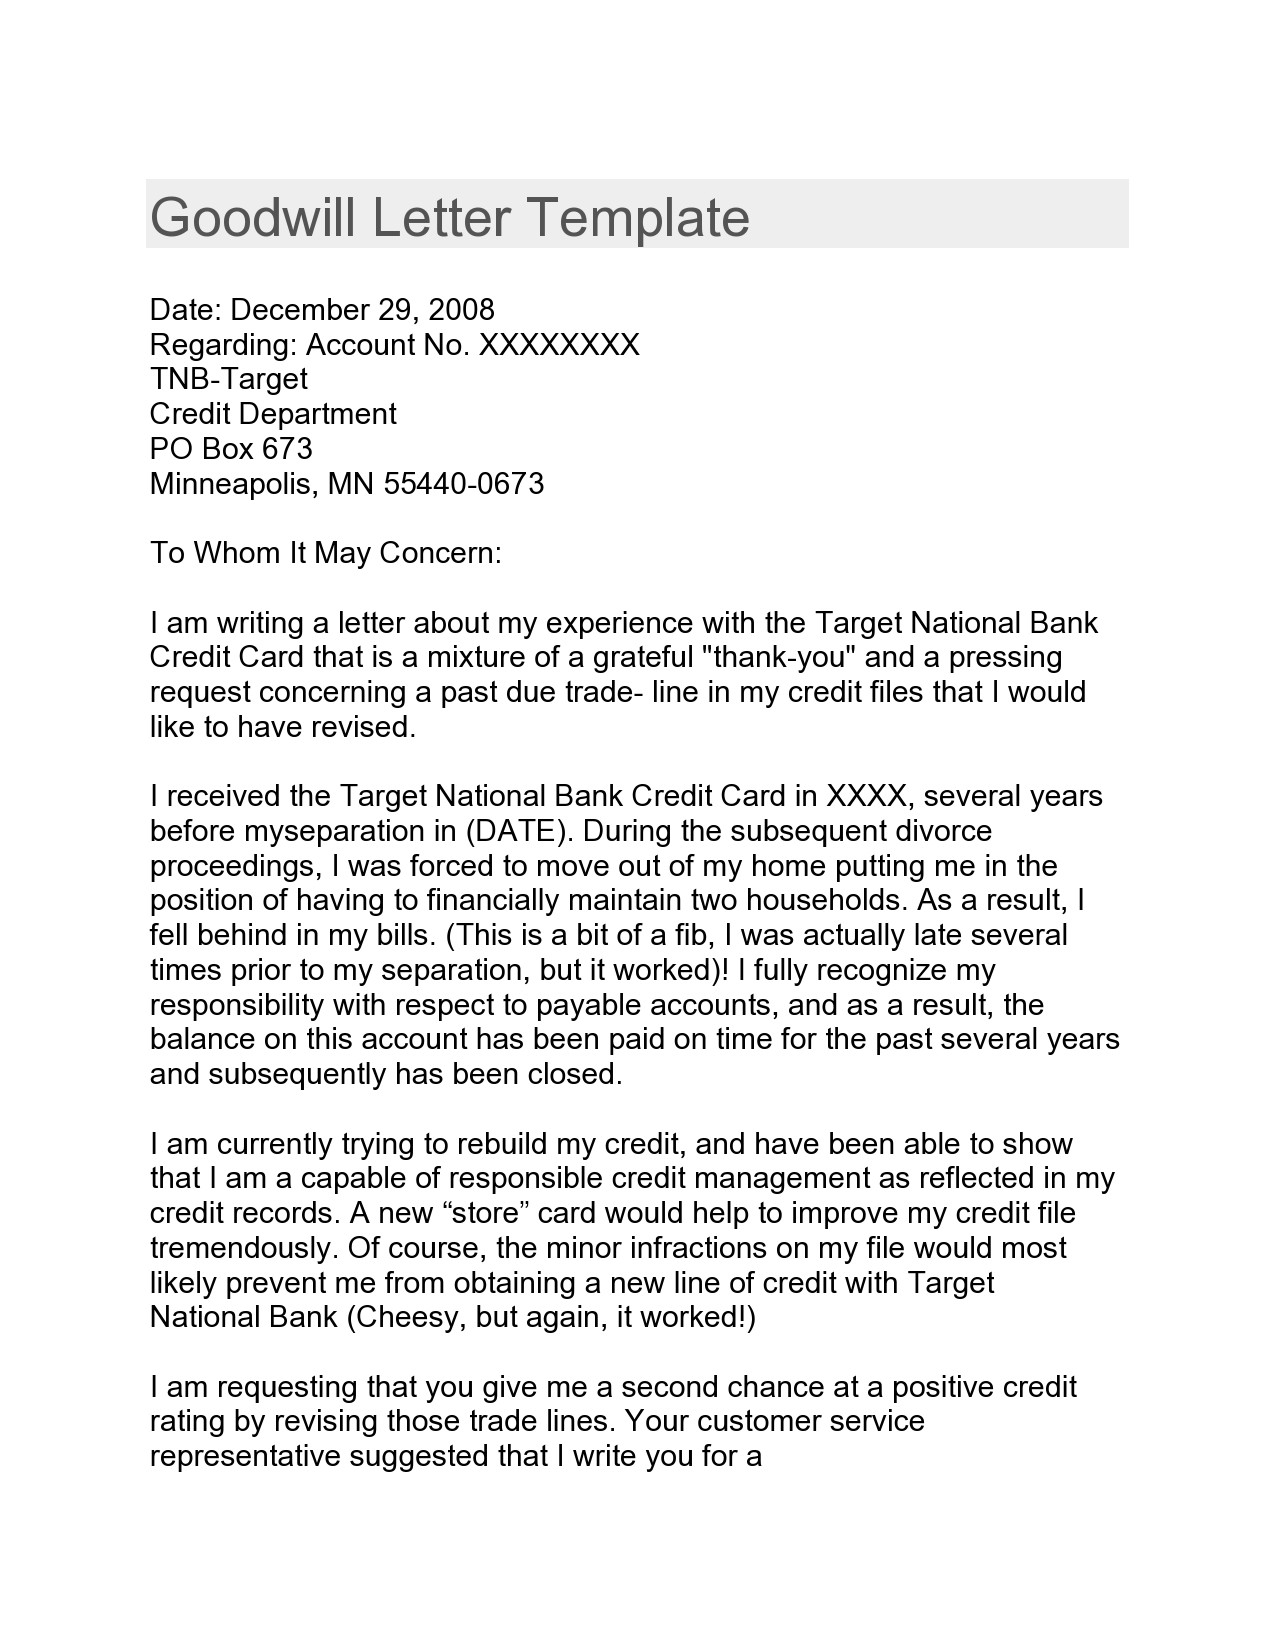 Free goodwill letter template 17